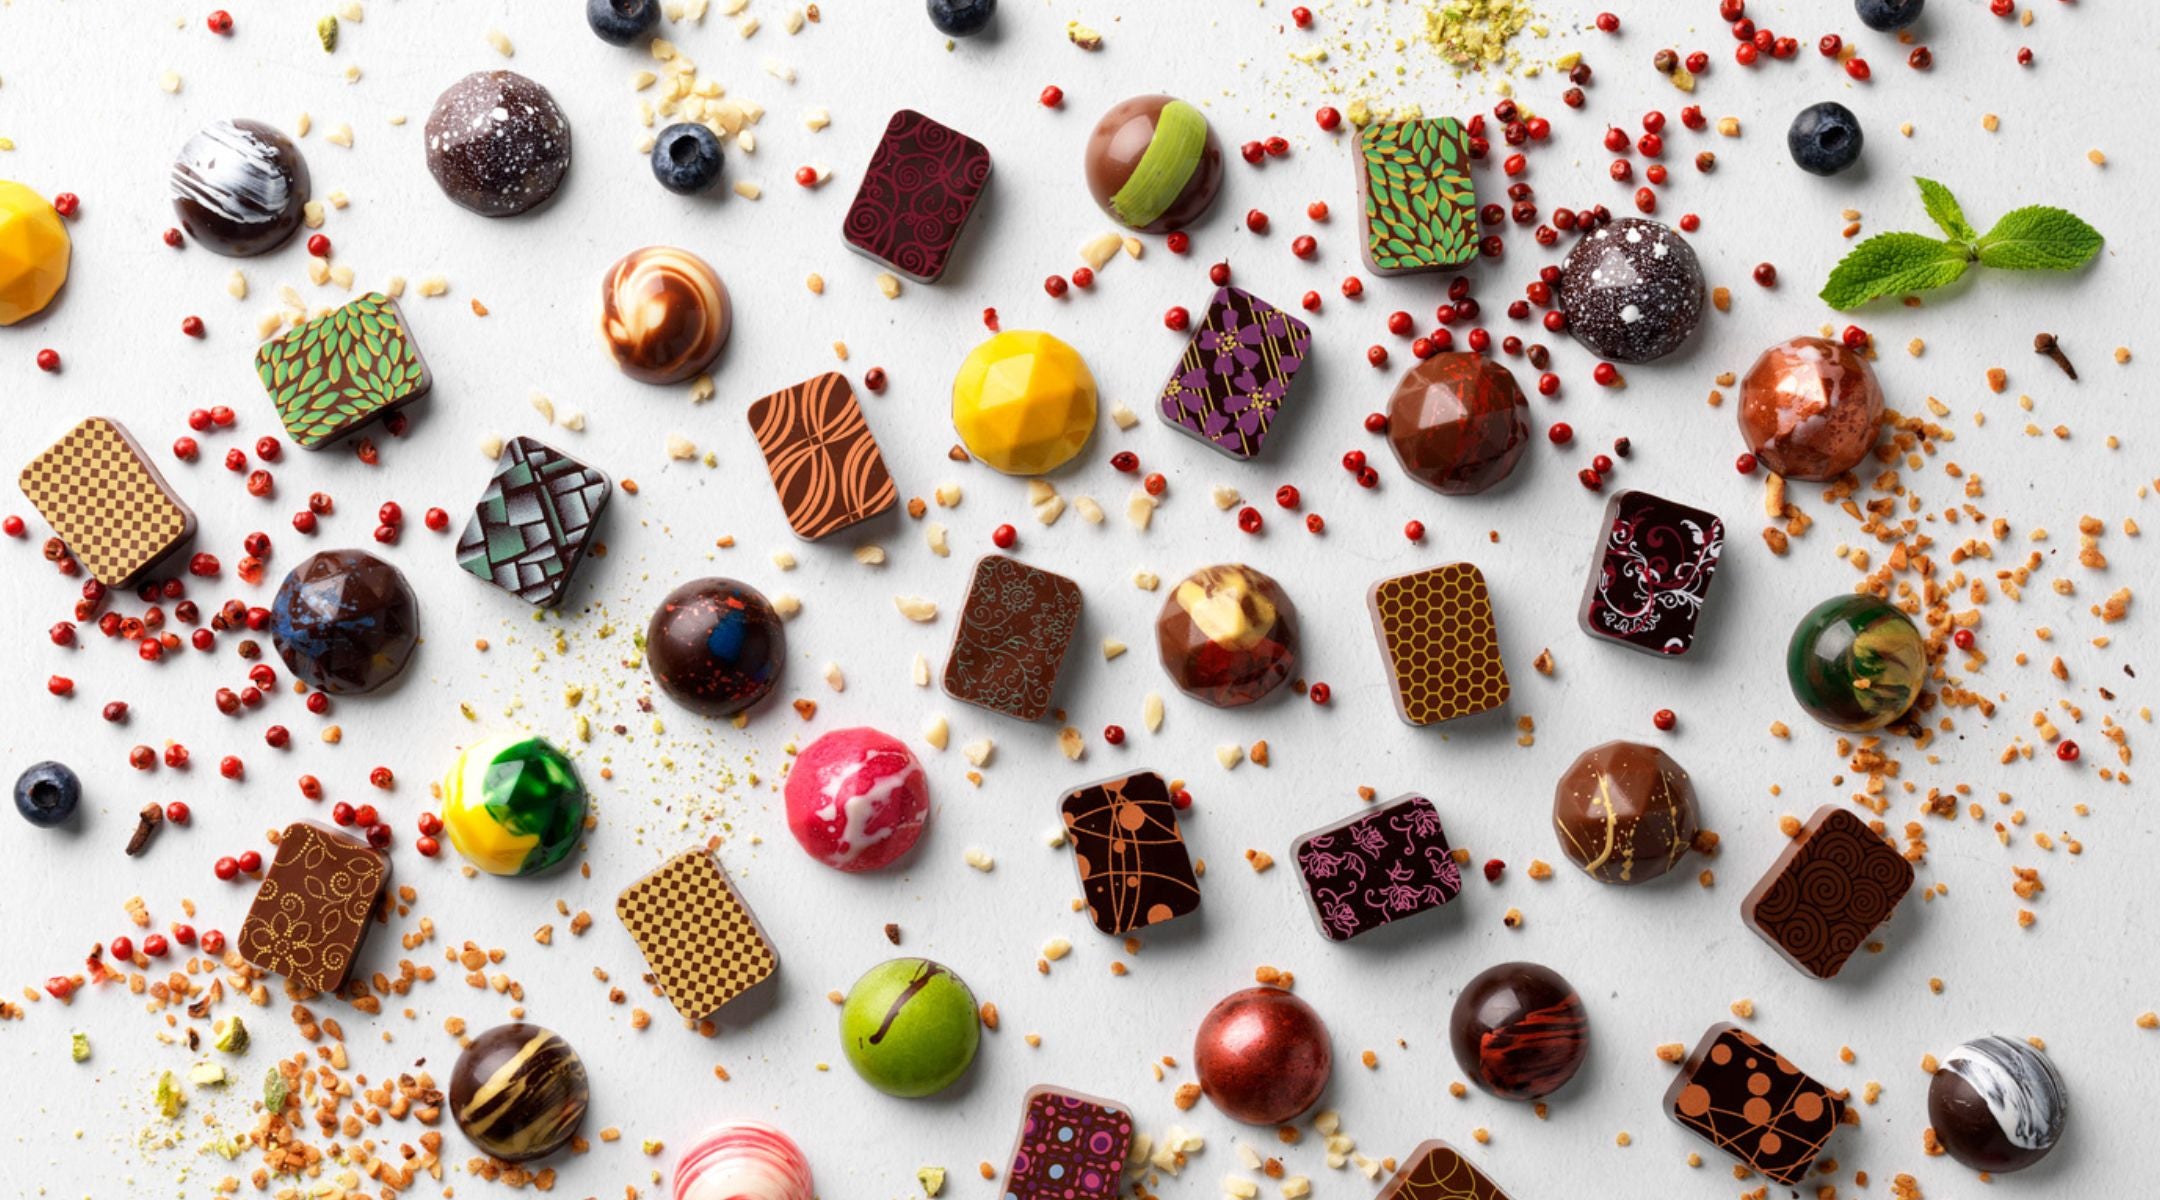 Colourful artisan chocolates surrounded by fresh ingredients